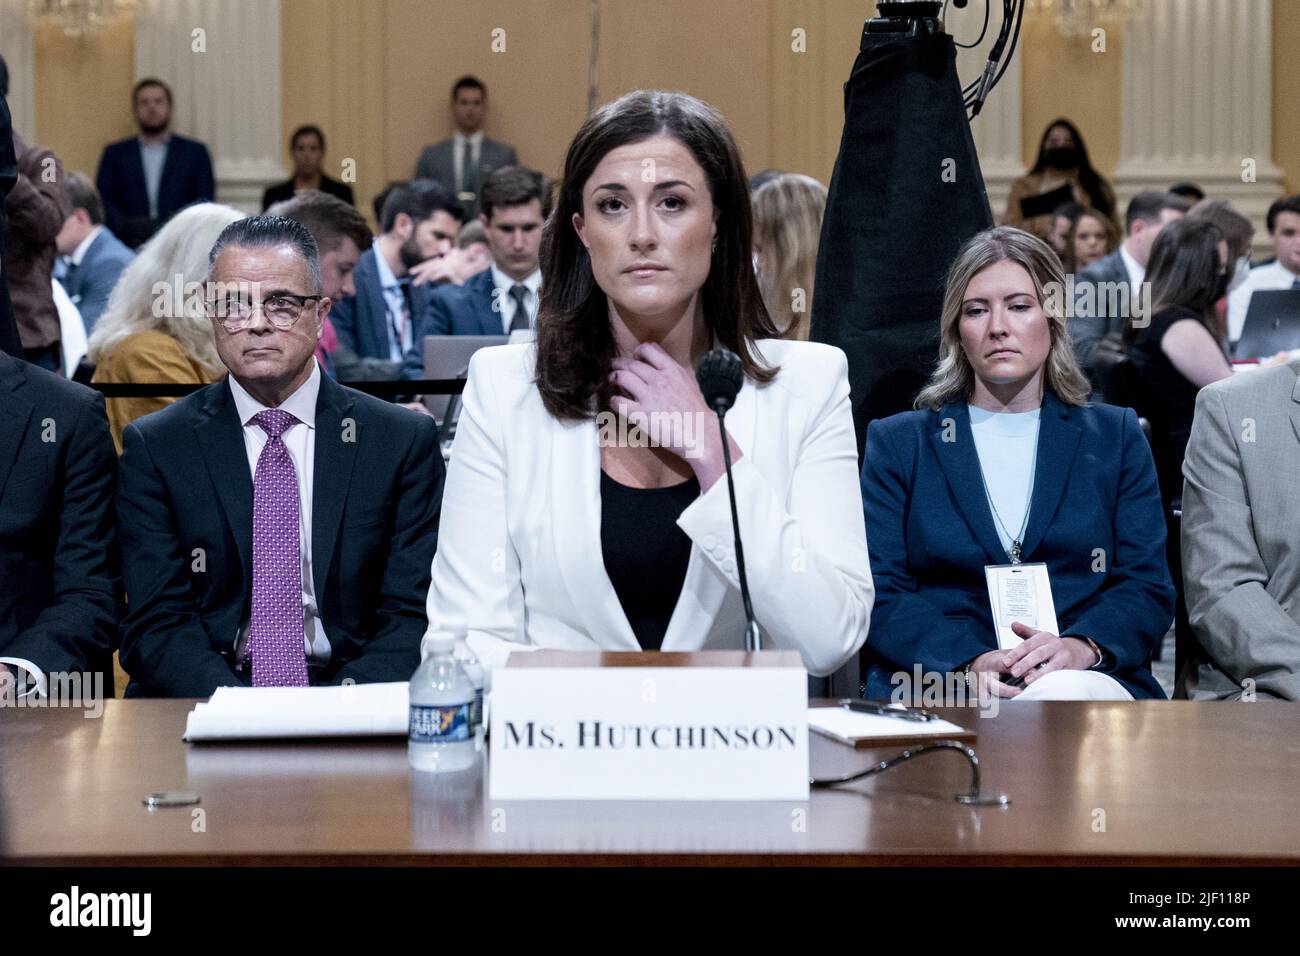 Washington, United States. 28th June, 2022. Cassidy Hutchinson, former aide to Trump White House chief of staff Mark Meadows, appears before the House select committee investigating the Jan. 6 attack on the U.S. Capitol holds a hearing at the Capitol in Washington, Tuesday, June 28, 2022. Pool Photo by Andrew Harnik/UPI Credit: UPI/Alamy Live News Stock Photo